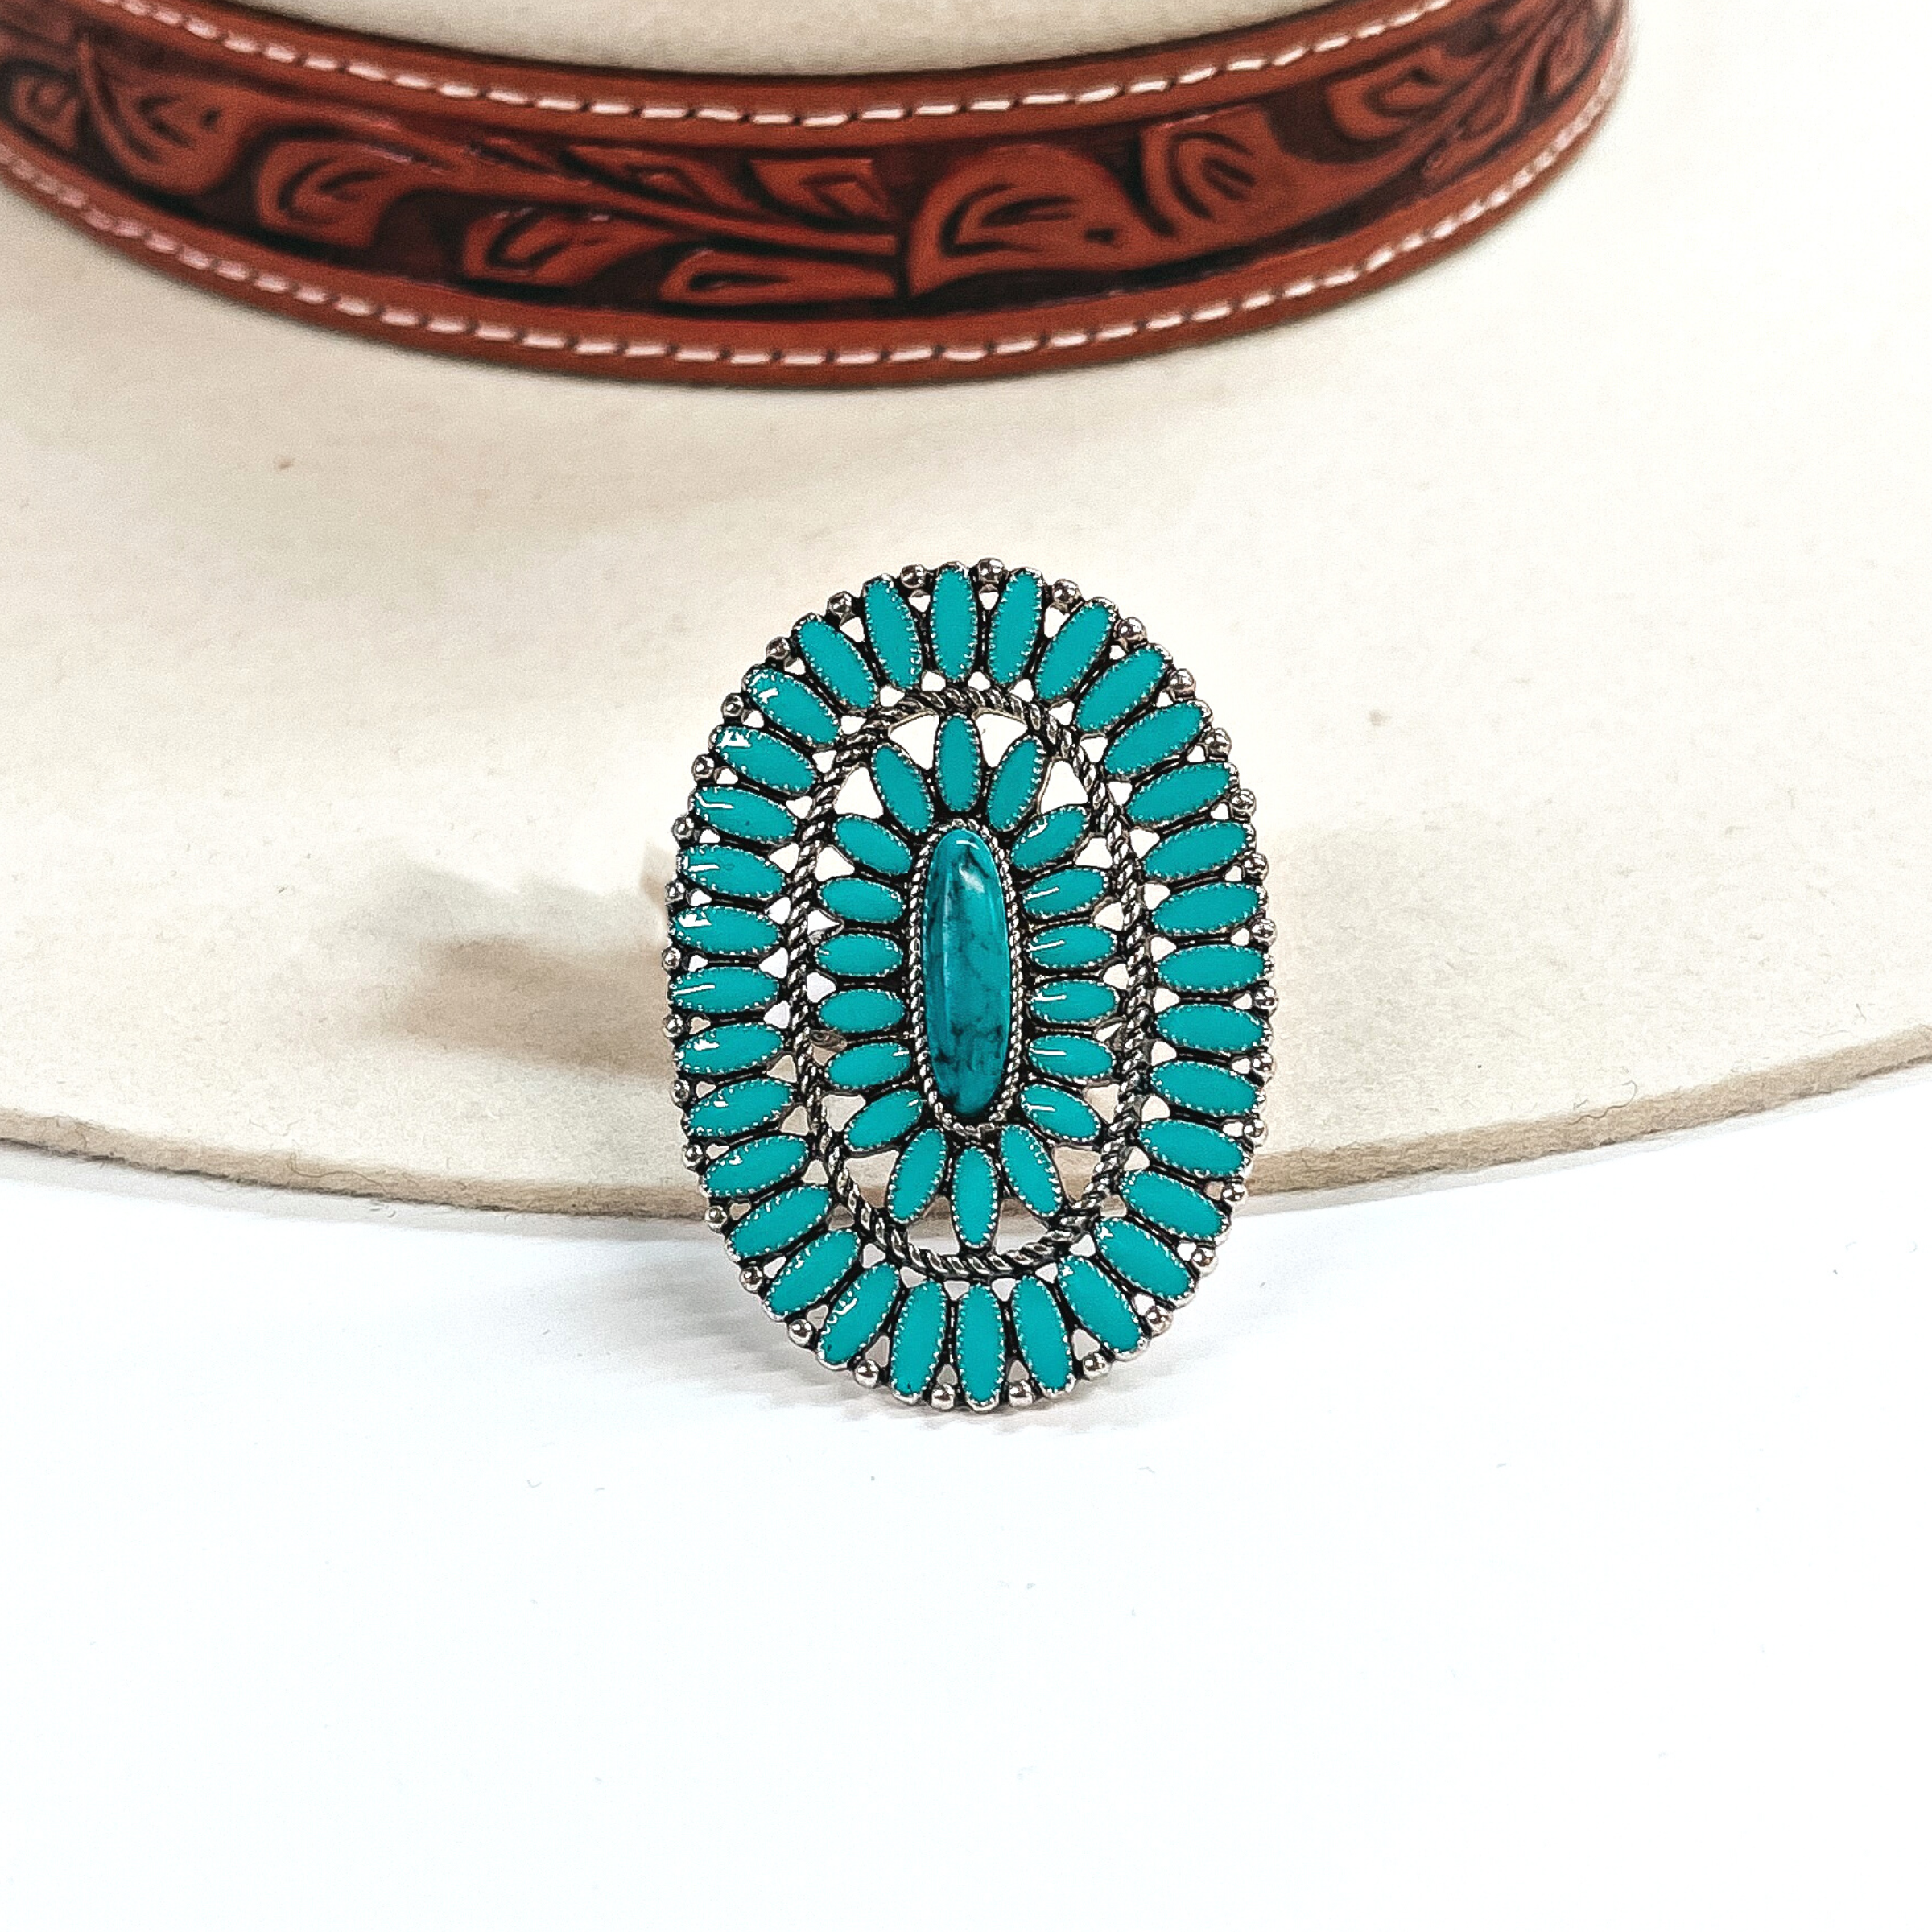 This is an oval turquoise stone cluster ring in a silver tone setting. There is a  long-skinny stone in the center with a silver textured outline with two rows of  small-oval stones all around. In between each row there is a silver rope-textured  outline. This ring is taken on an ivory felt hat  with a brown textured band and on a white background.